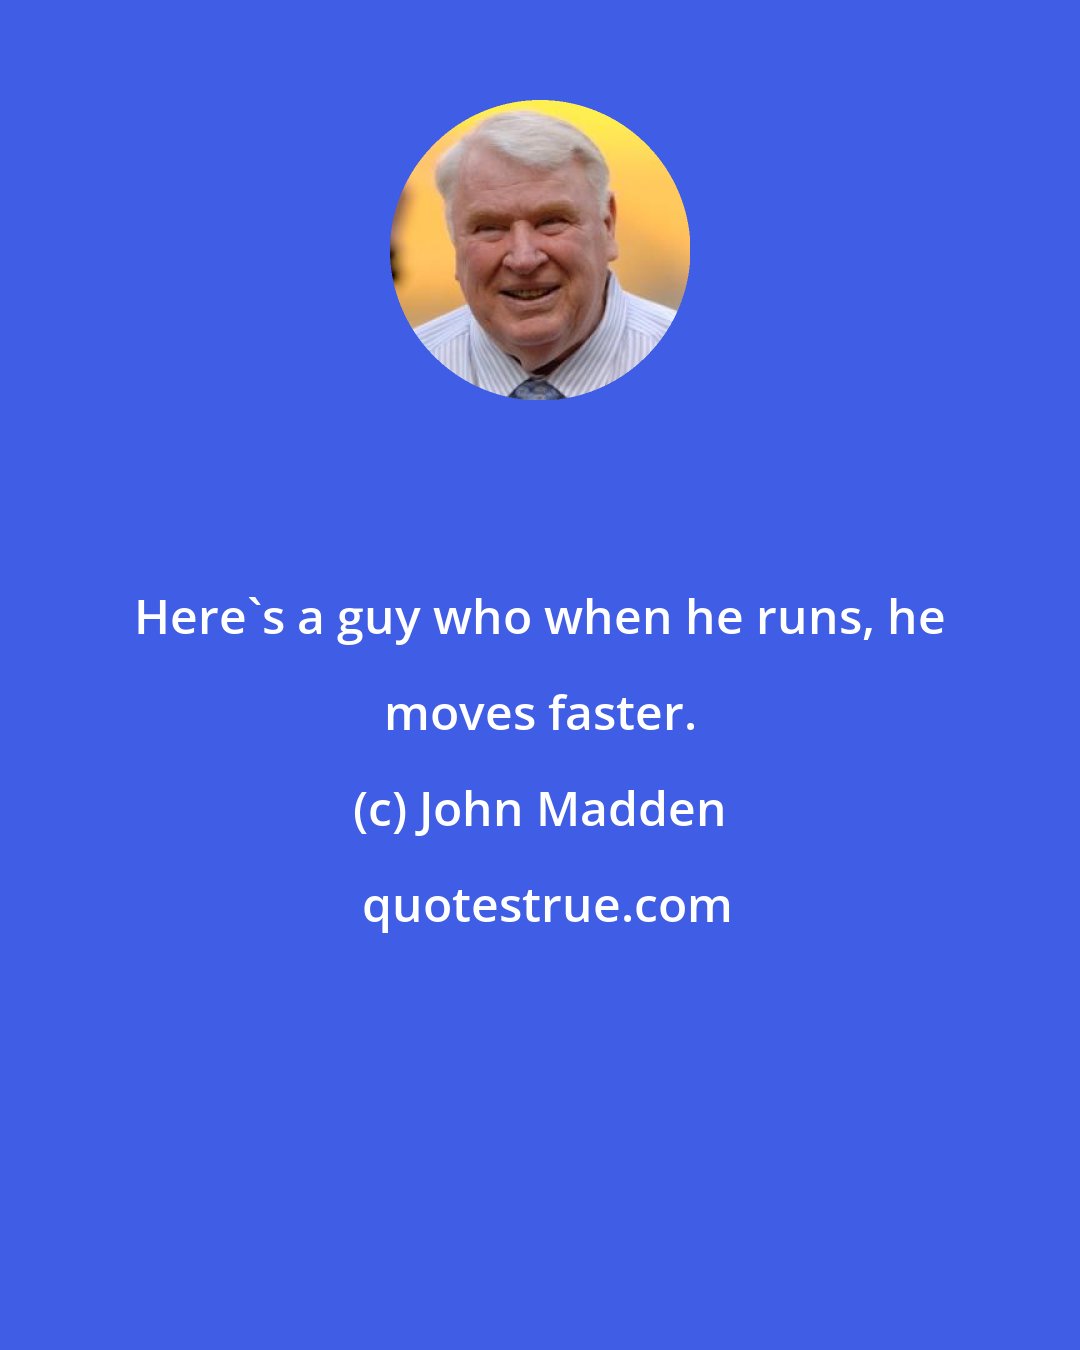 John Madden: Here's a guy who when he runs, he moves faster.